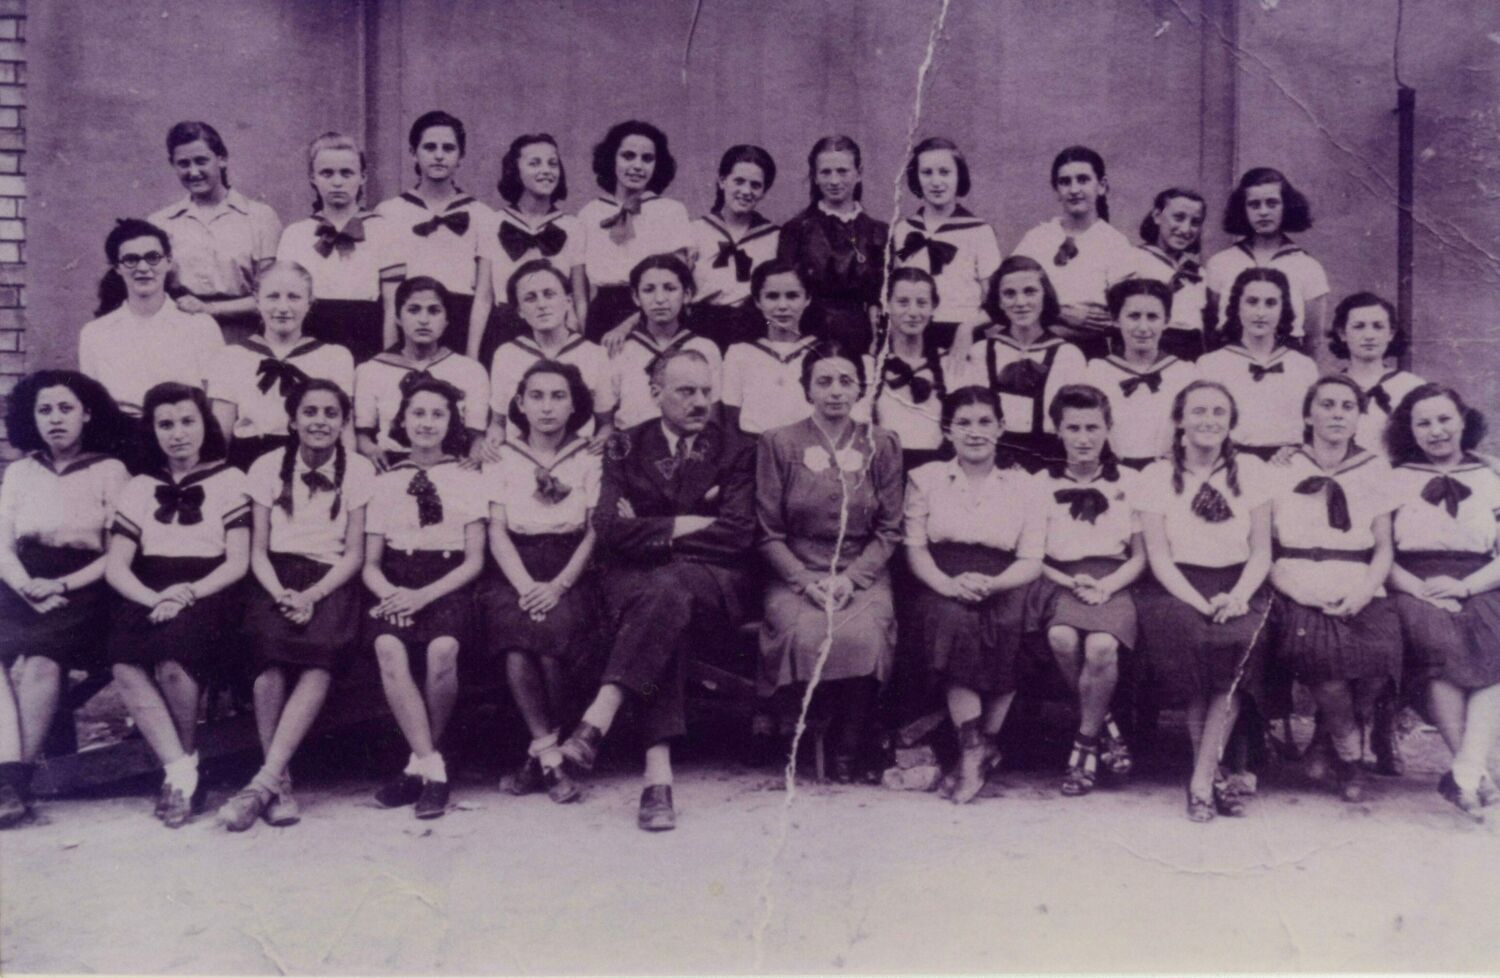 A class photo of girls wearing a uniform of a white top and dark skirt, two teachers sitting in the front row.